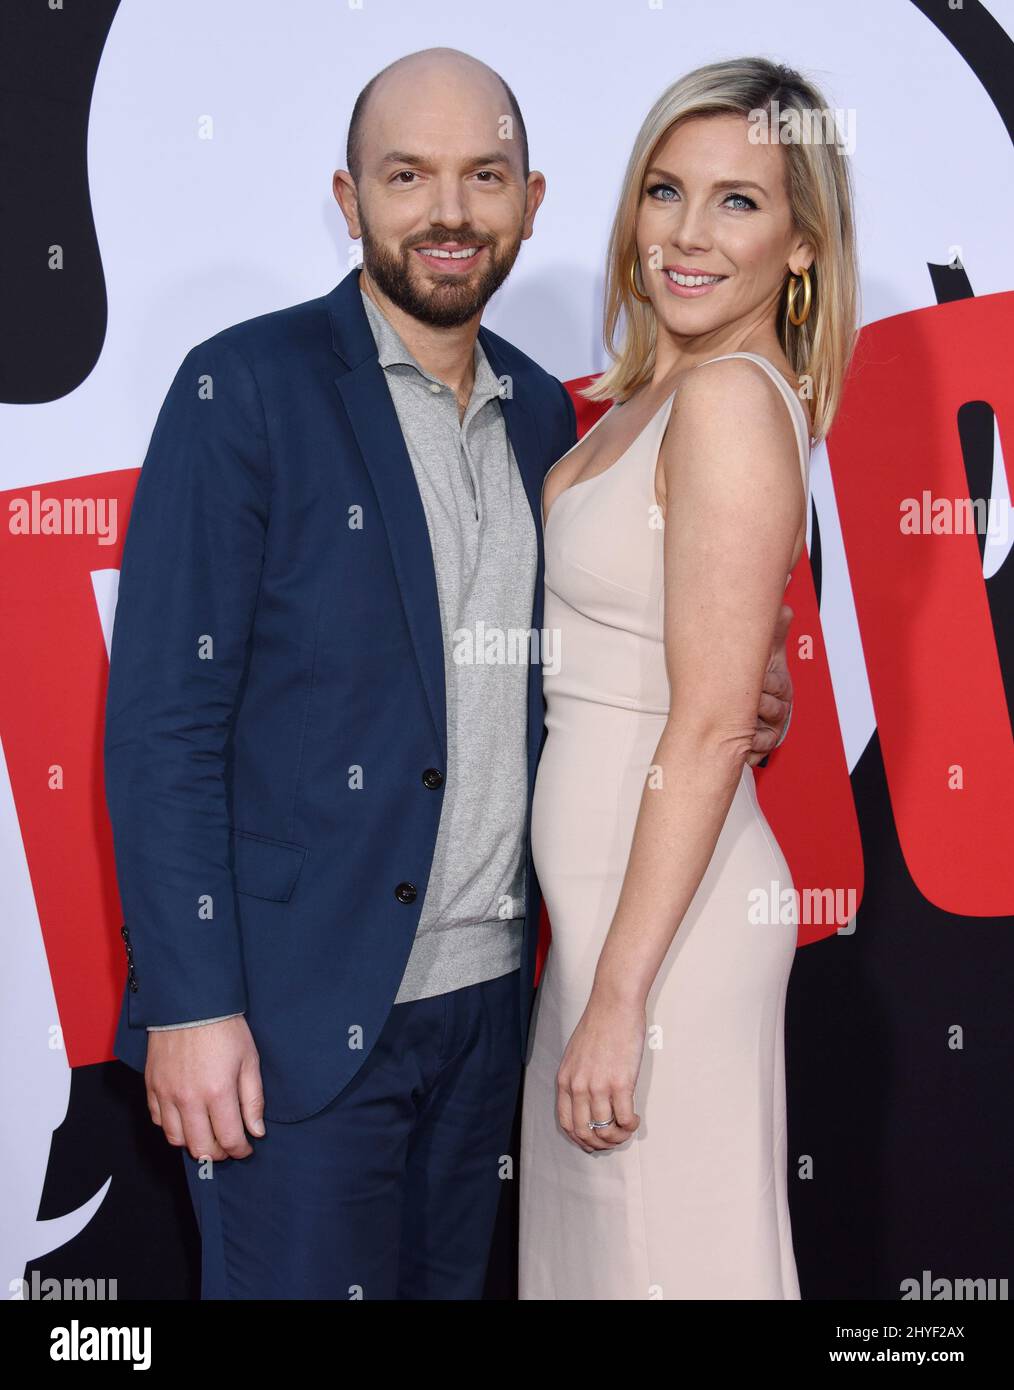 June Diane Raphael and Paul Scheer at Universal Pictures 'Blockers' Los Angeles Premiere held at the Regency Village Theatre on April 3, 2018 in Westwood Stock Photo